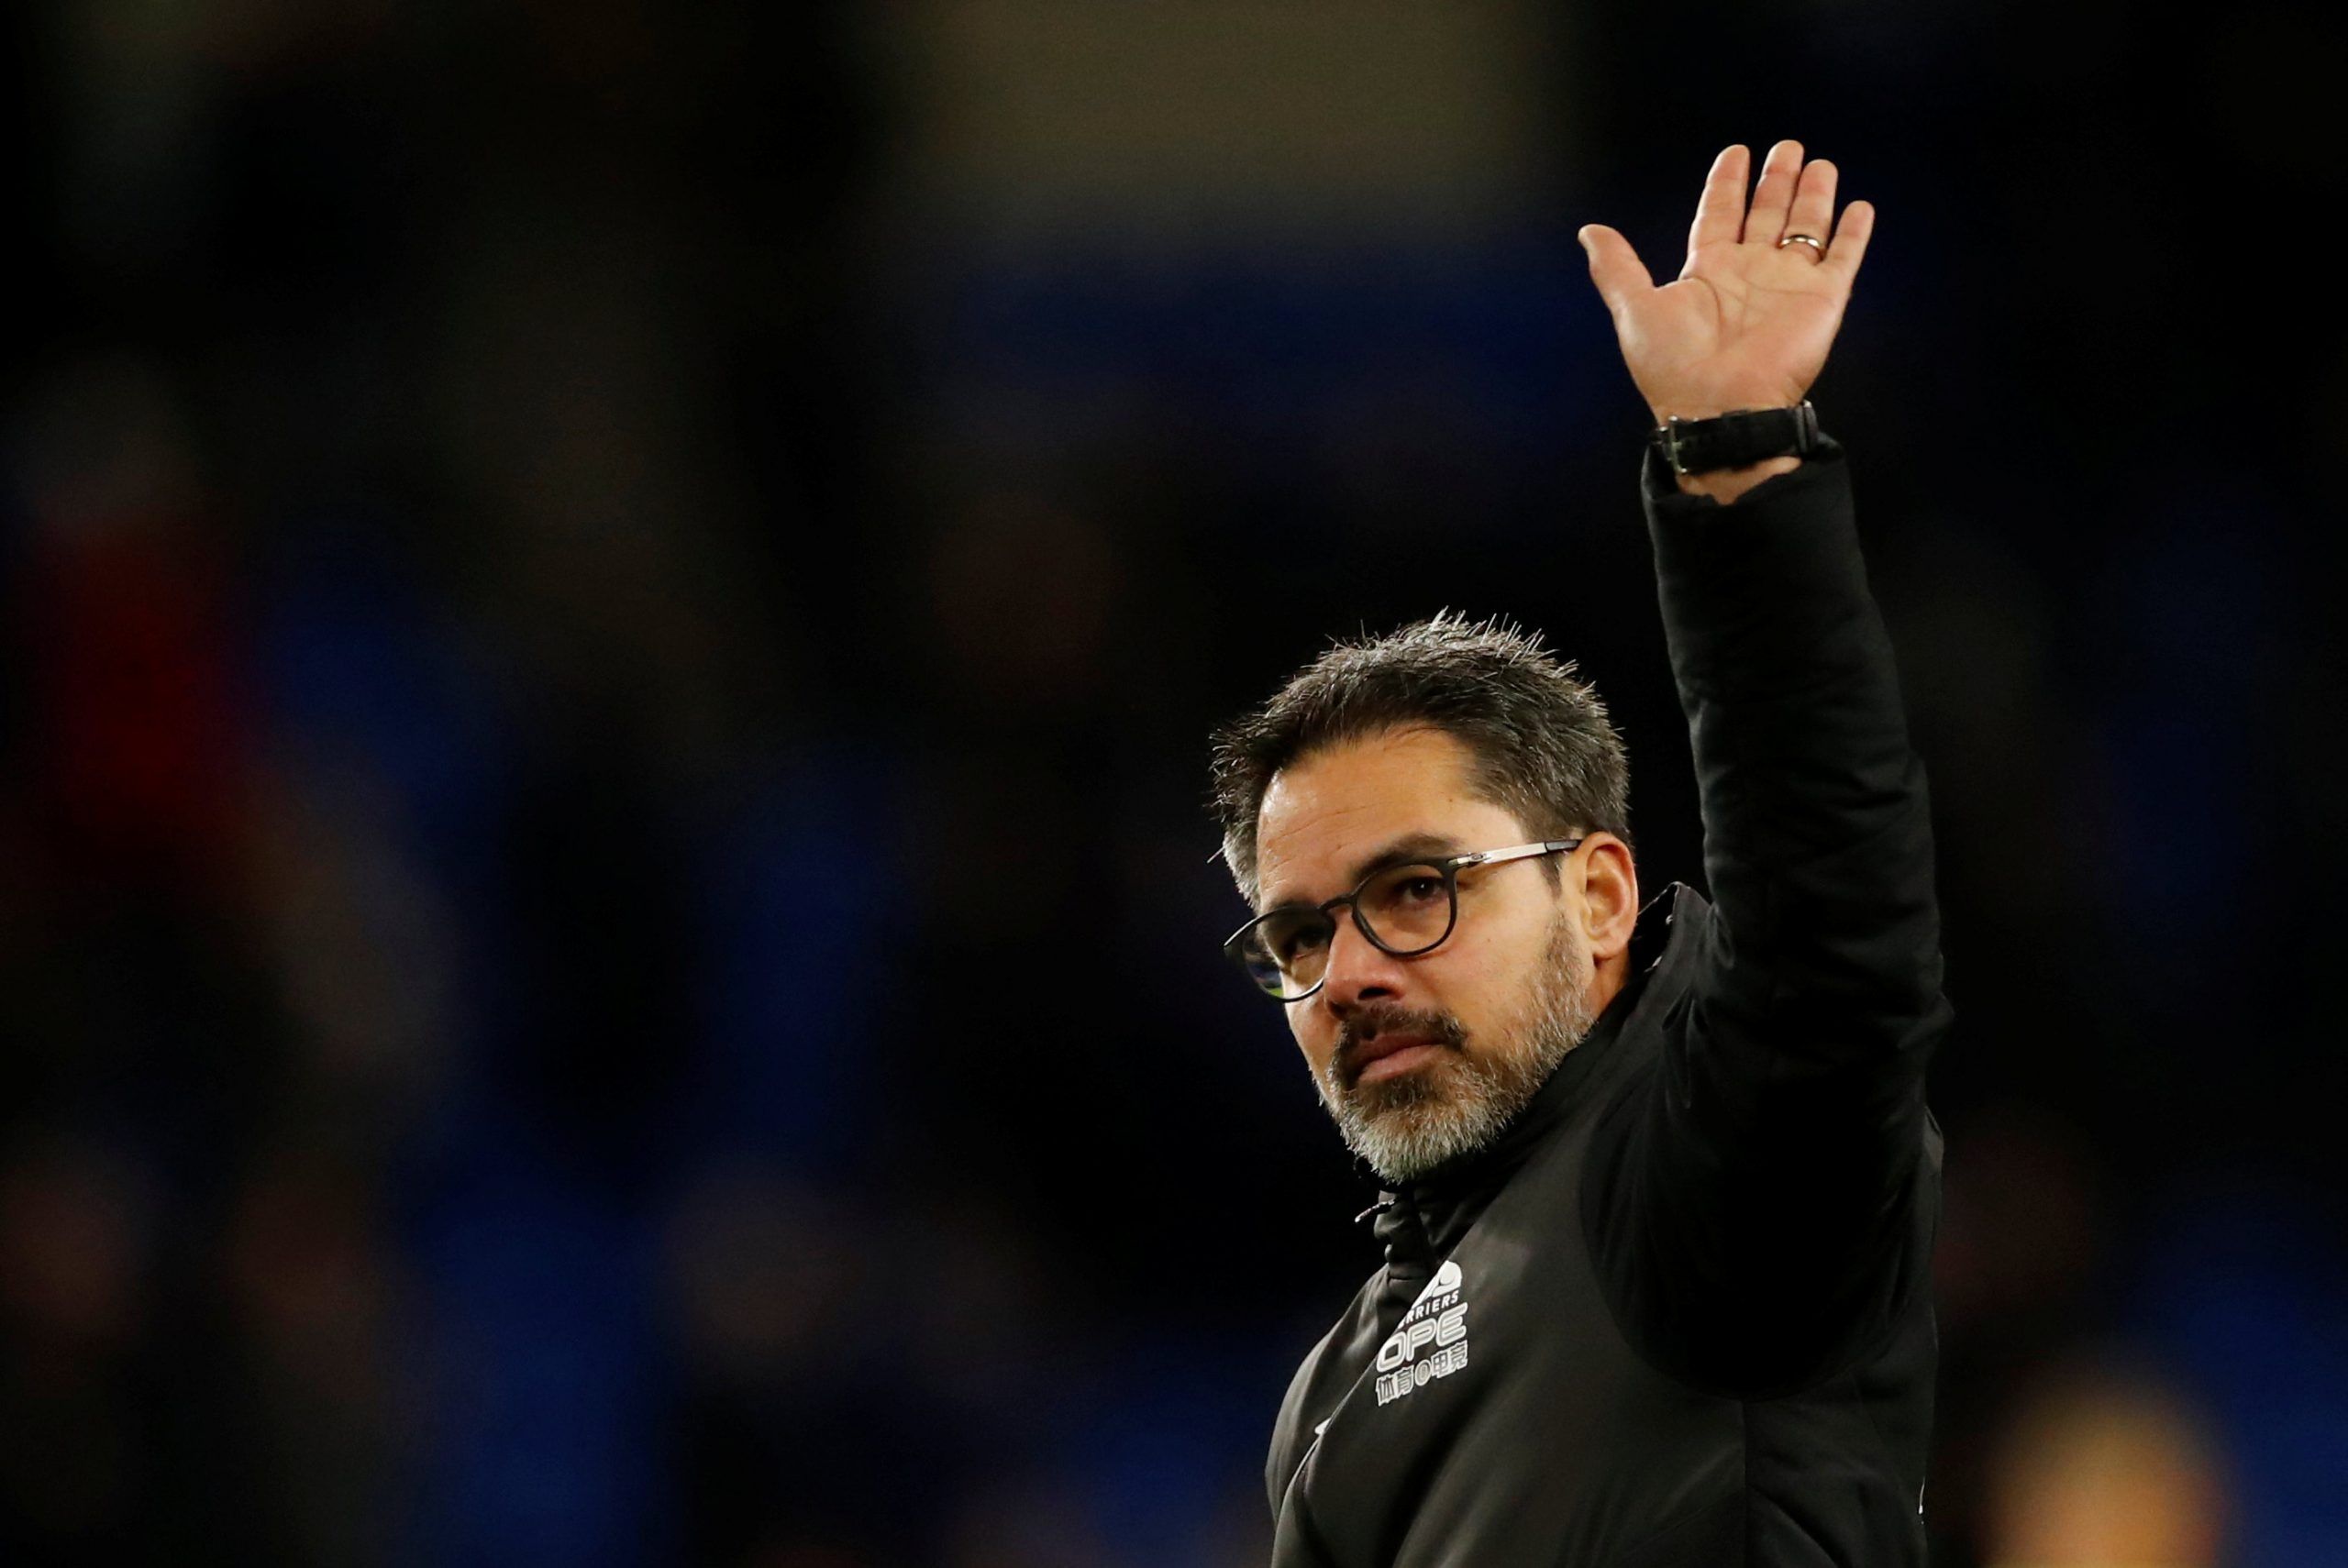 FILE PHOTO: Soccer Football - Premier League - Cardiff City v Huddersfield Town - Cardiff City Stadium, Cardiff, Britain - January 12, 2019   Huddersfield Town manager David Wagner after the match    Action Images via Reuters/Andrew Boyers/File Photo    EDITORIAL USE ONLY. No use with unauthorized audio, video, data, fixture lists, club/league logos or 